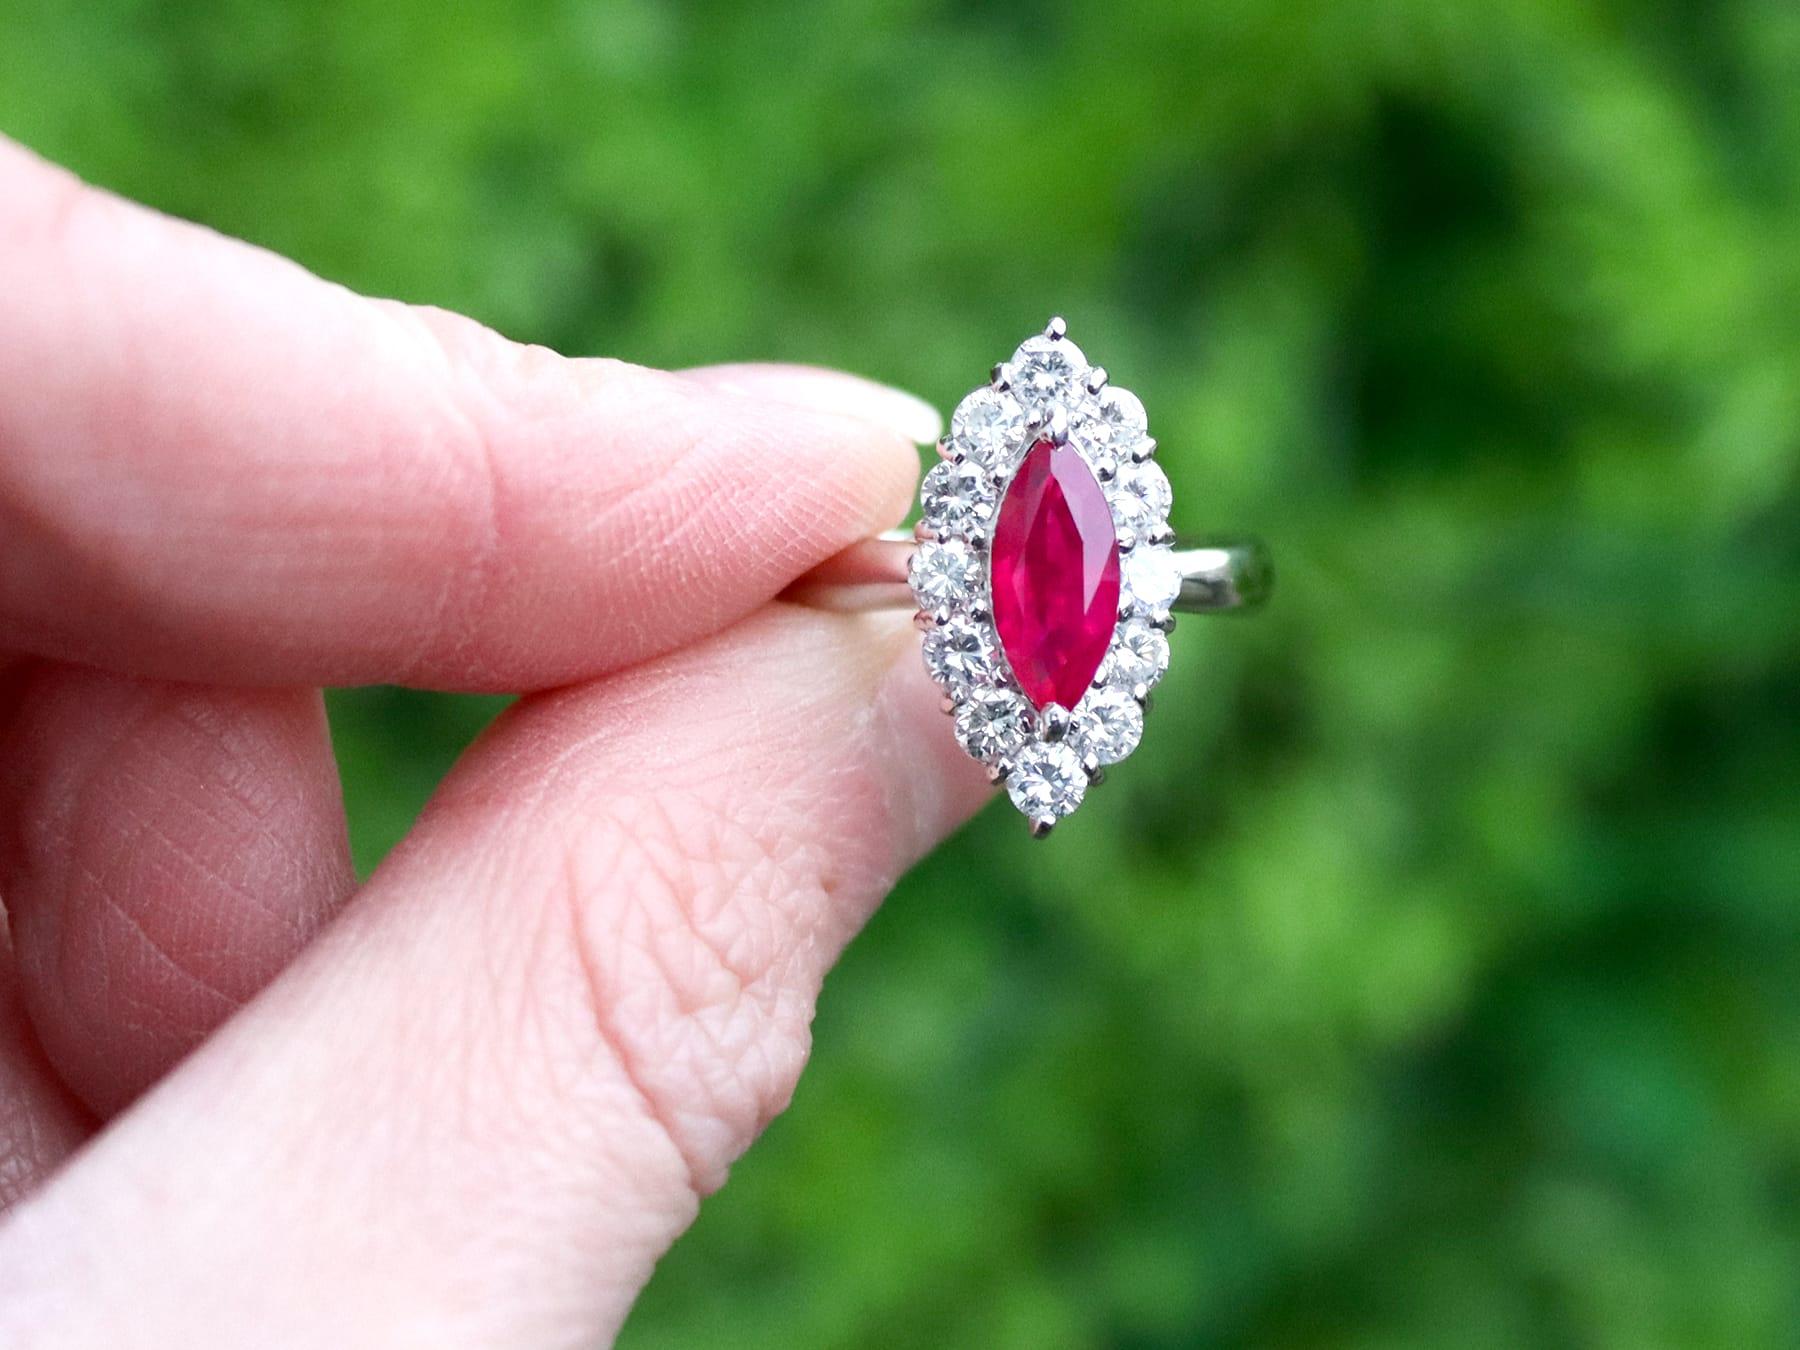 A stunning, fine and impressive vintage 1.53 carat ruby and 1.03 carat diamond, platinum dress ring; part of our vintage jewellery and estate jewelry collections

This stunning, fine and impressive vintage ruby engagement ring has been crafted in